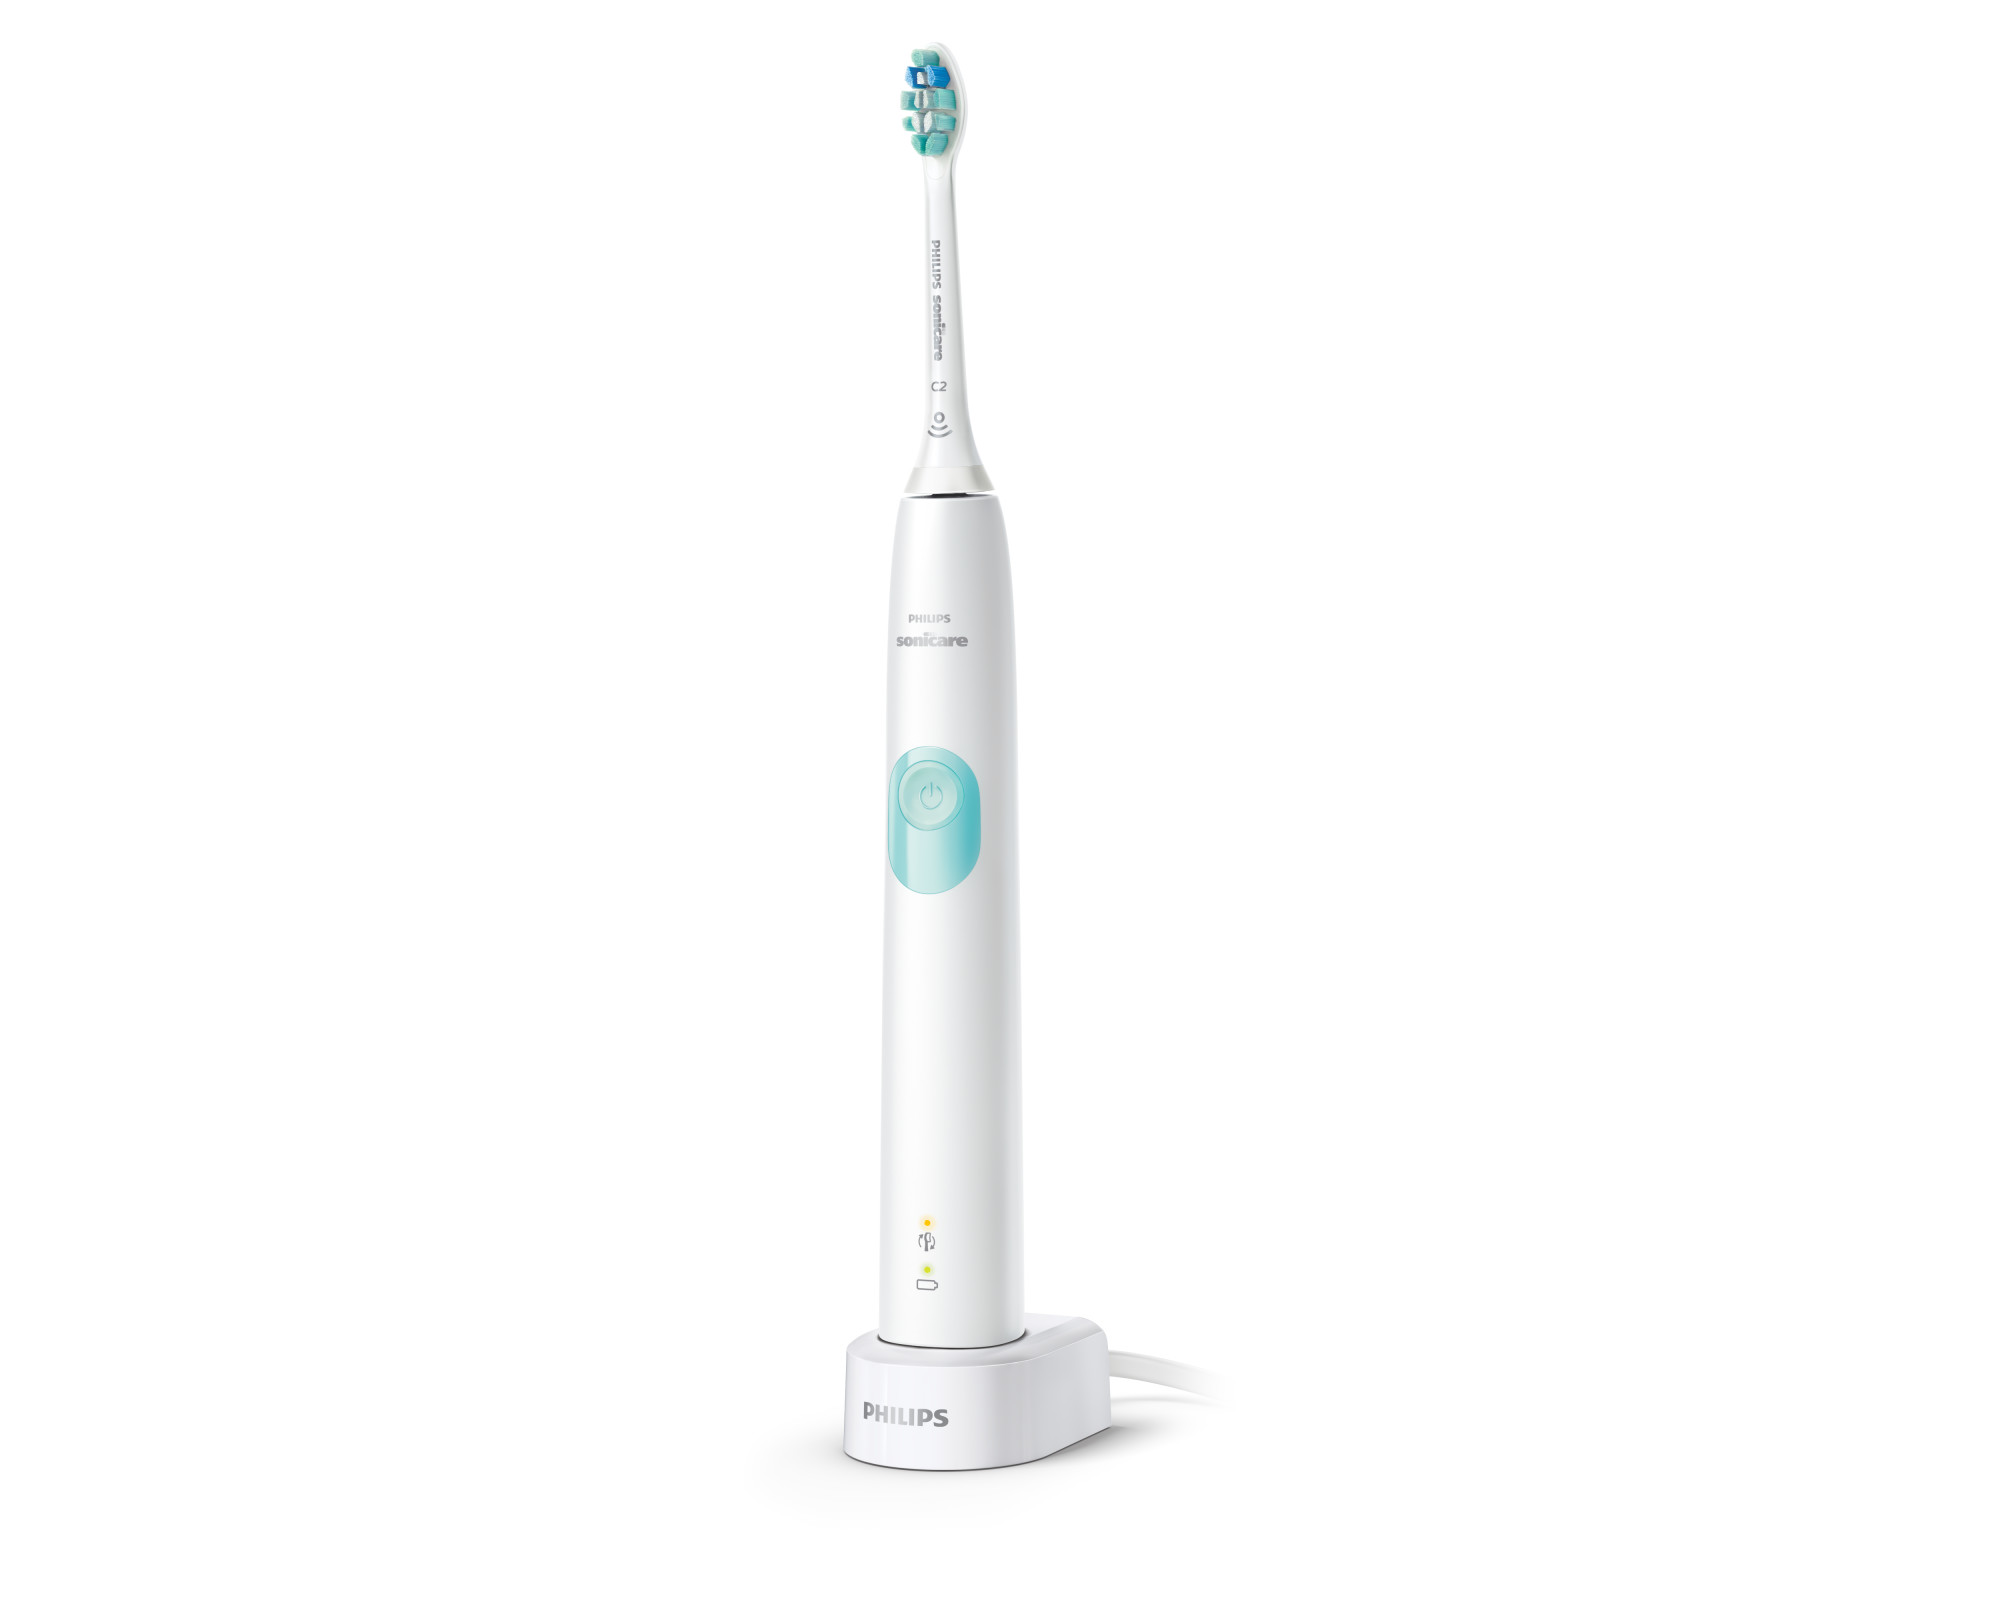 Philips Sonicare ProtectiveClean 4100 Plaque Control, Rechargeable Electric Toothbrush with Pressure Sensor, White Mint HX6817/01 - image 9 of 14